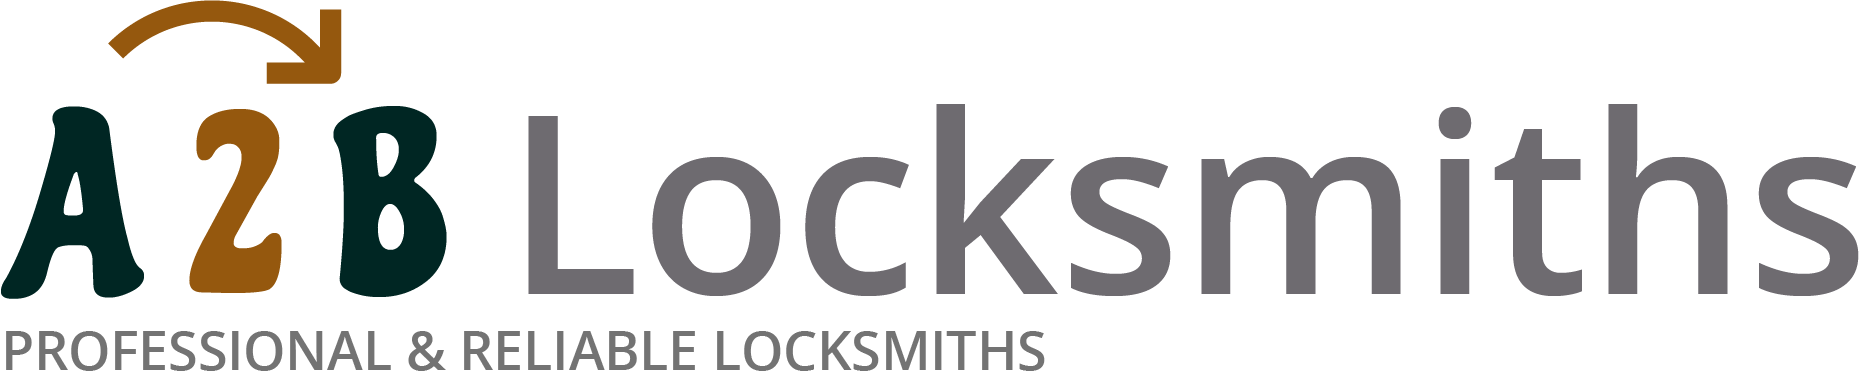 If you are locked out of house in Loughton, our 24/7 local emergency locksmith services can help you.